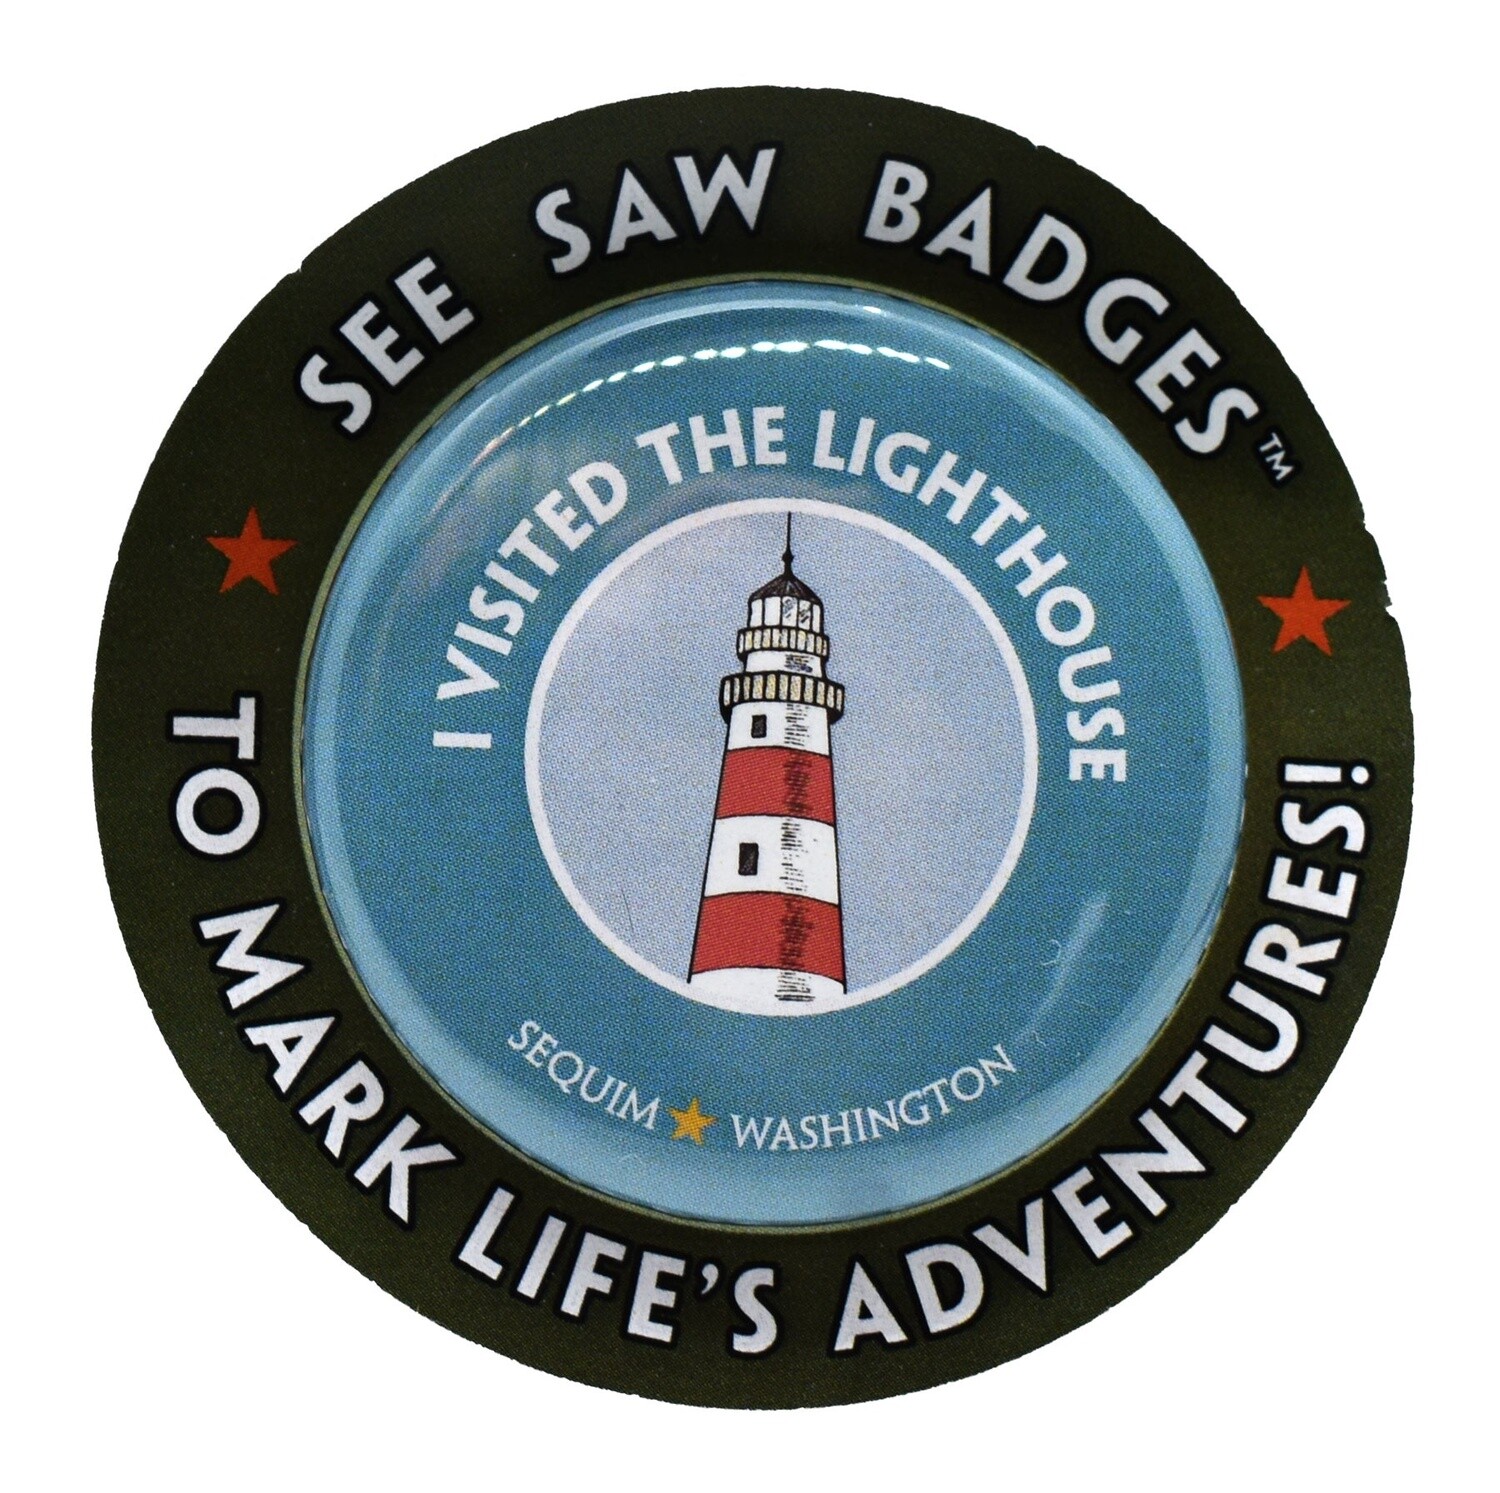 Channel Craft See Saw Badge- I visited the lighthouse, Sequim*Washington